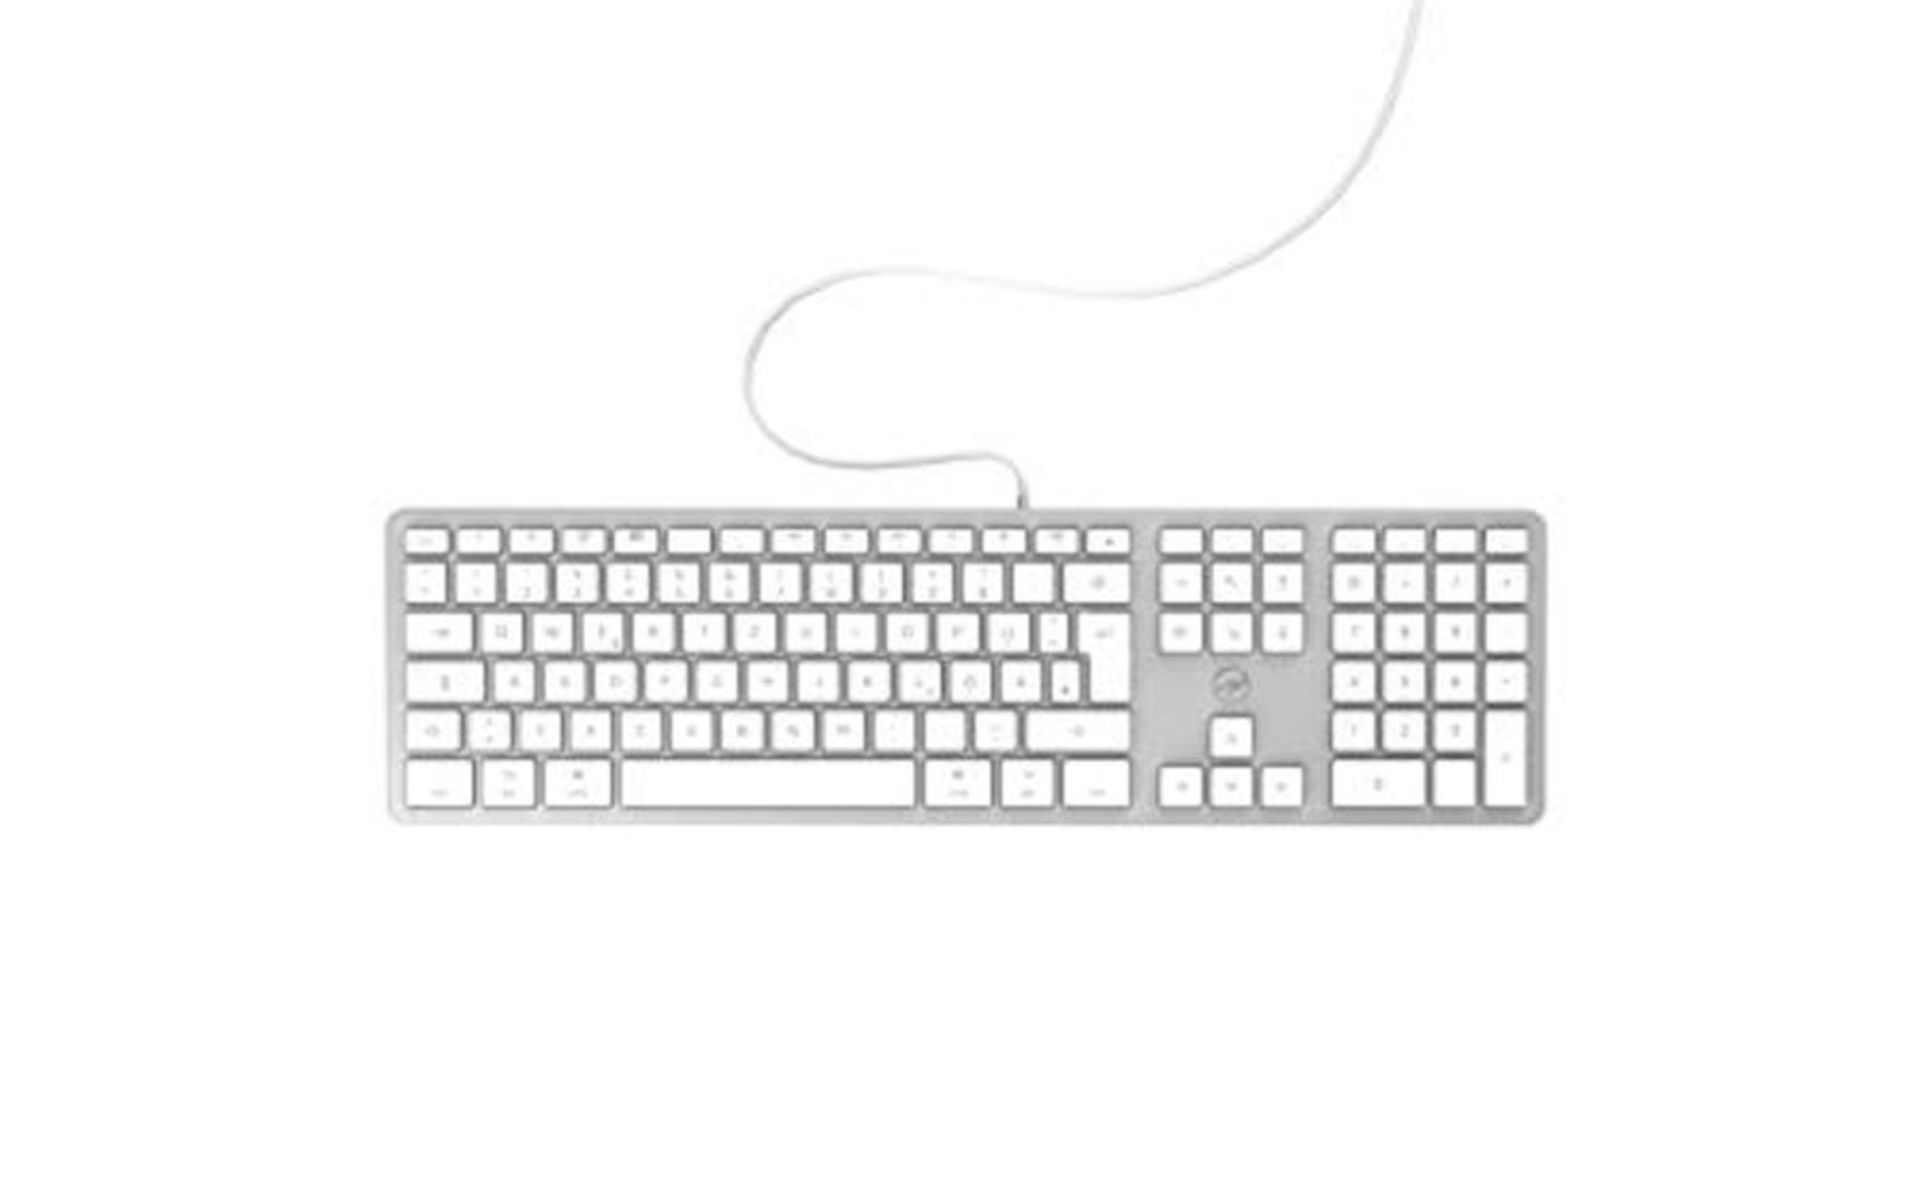 Mobility Lab ML311142 Wired Keyboard QWERTZ German Layout ideal for Mac - White/Silver